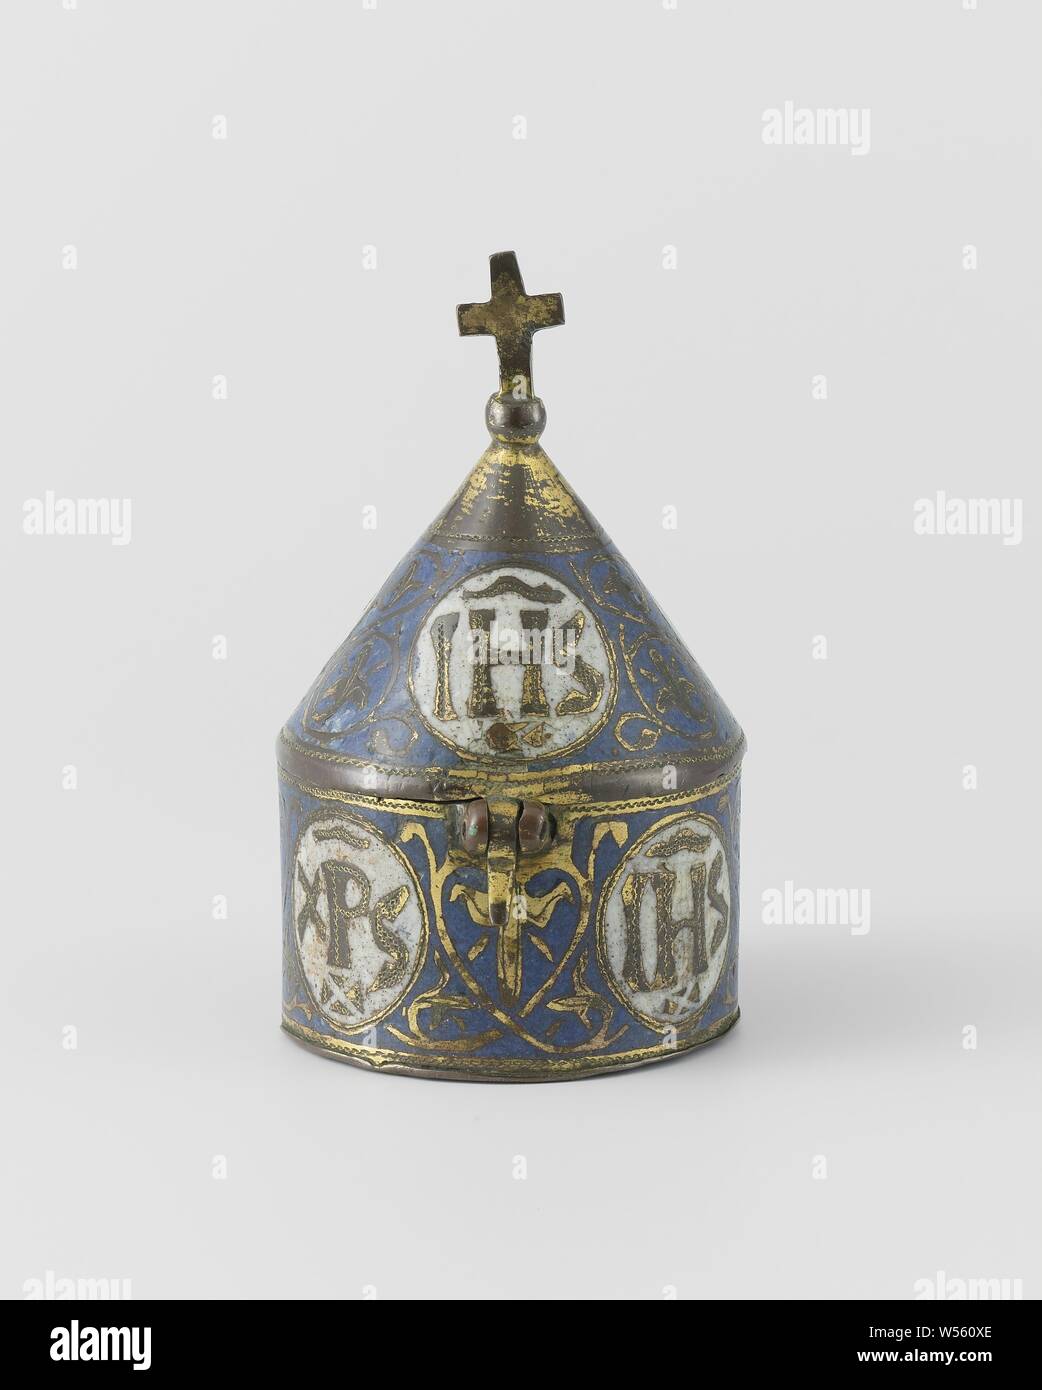 Pixis with medallions with the letters IHS and the monogram XPS, Pixis of gilt copper and enamel champlevé. The body is cylindrical. The conical lid is crowned by a cross on a sphere. The lid is connected to the body with a hinge and on the opposite side has a pierced snub which fits on the body between two eyes and can thus be closed with a pin. The lid is adorned with blue enamel ground, on which tendril ornament encloses four on the body, and on the lid three medallions of white enamel. The medallions show the letters IHS and the monogram XPS alternately. The bottom is connected to IHS (' Stock Photo